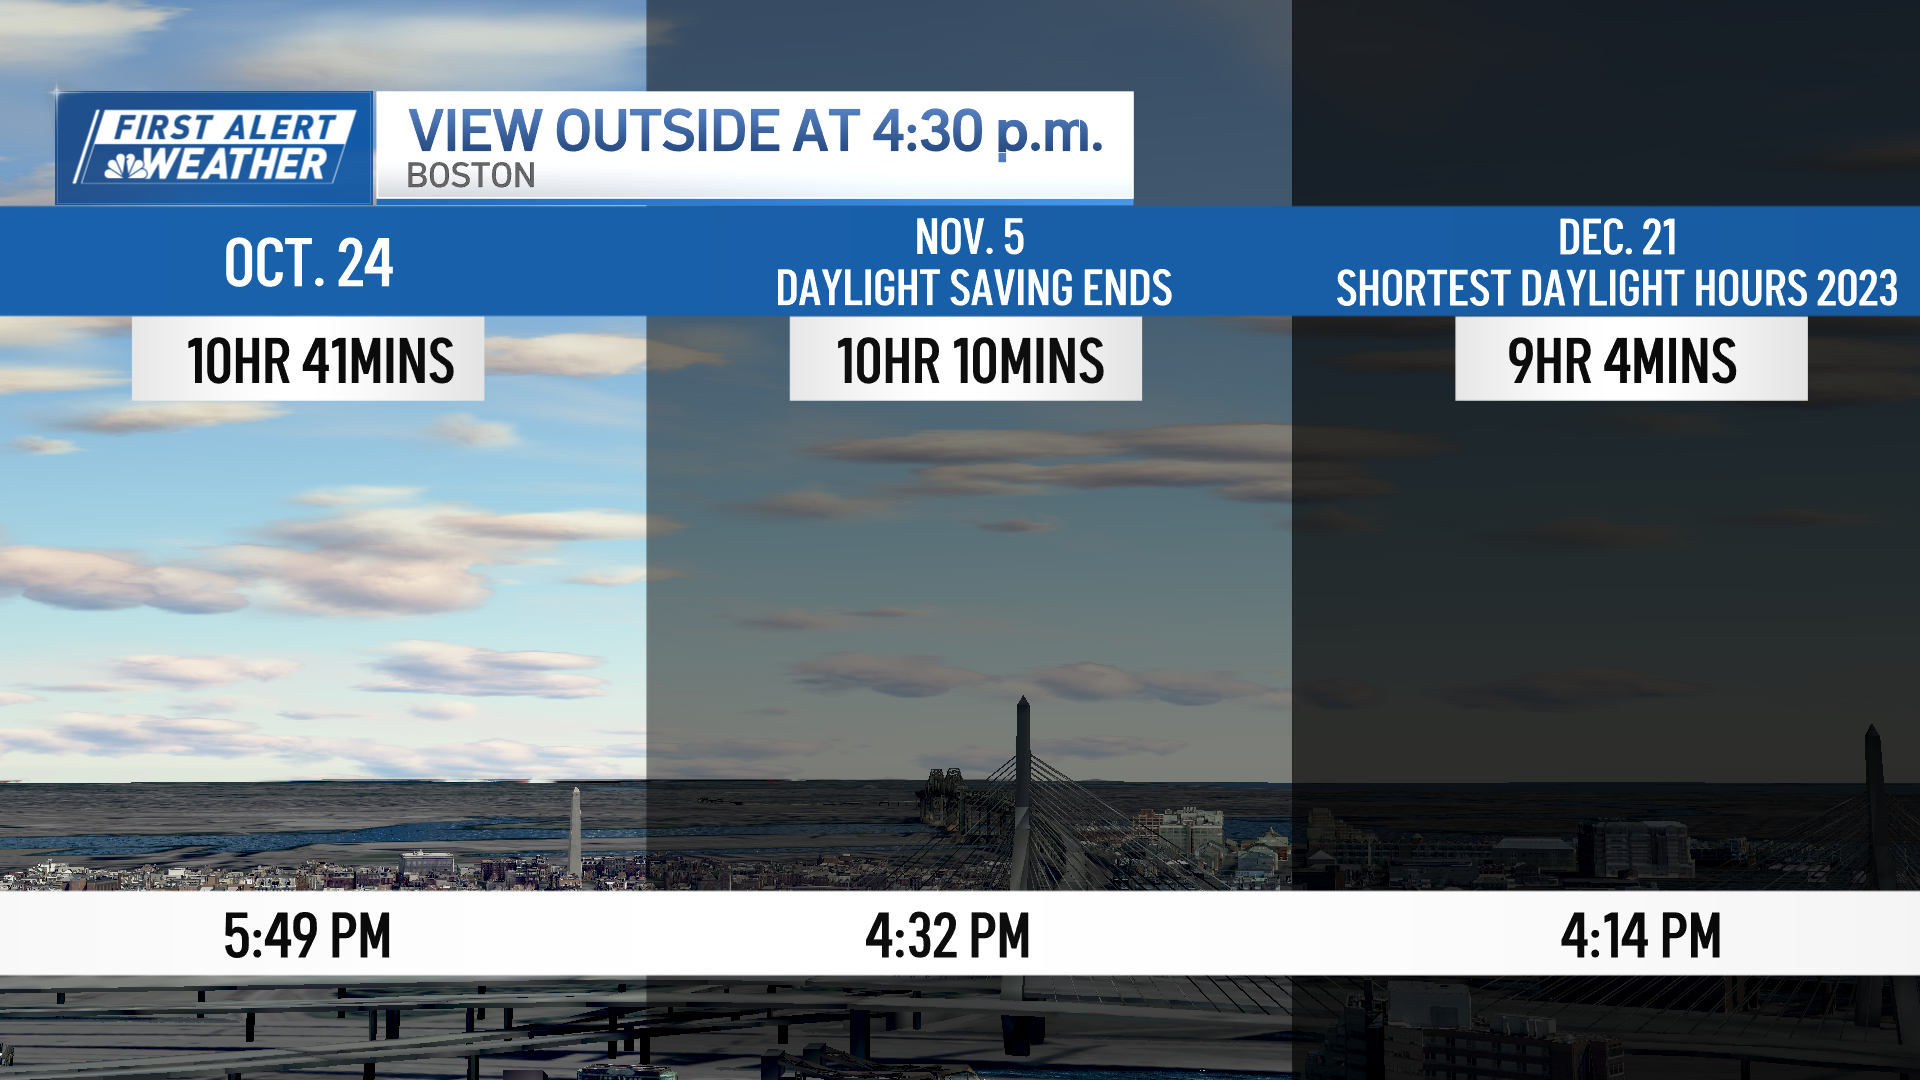 Early sunsets coming as daylight saving time ends soon